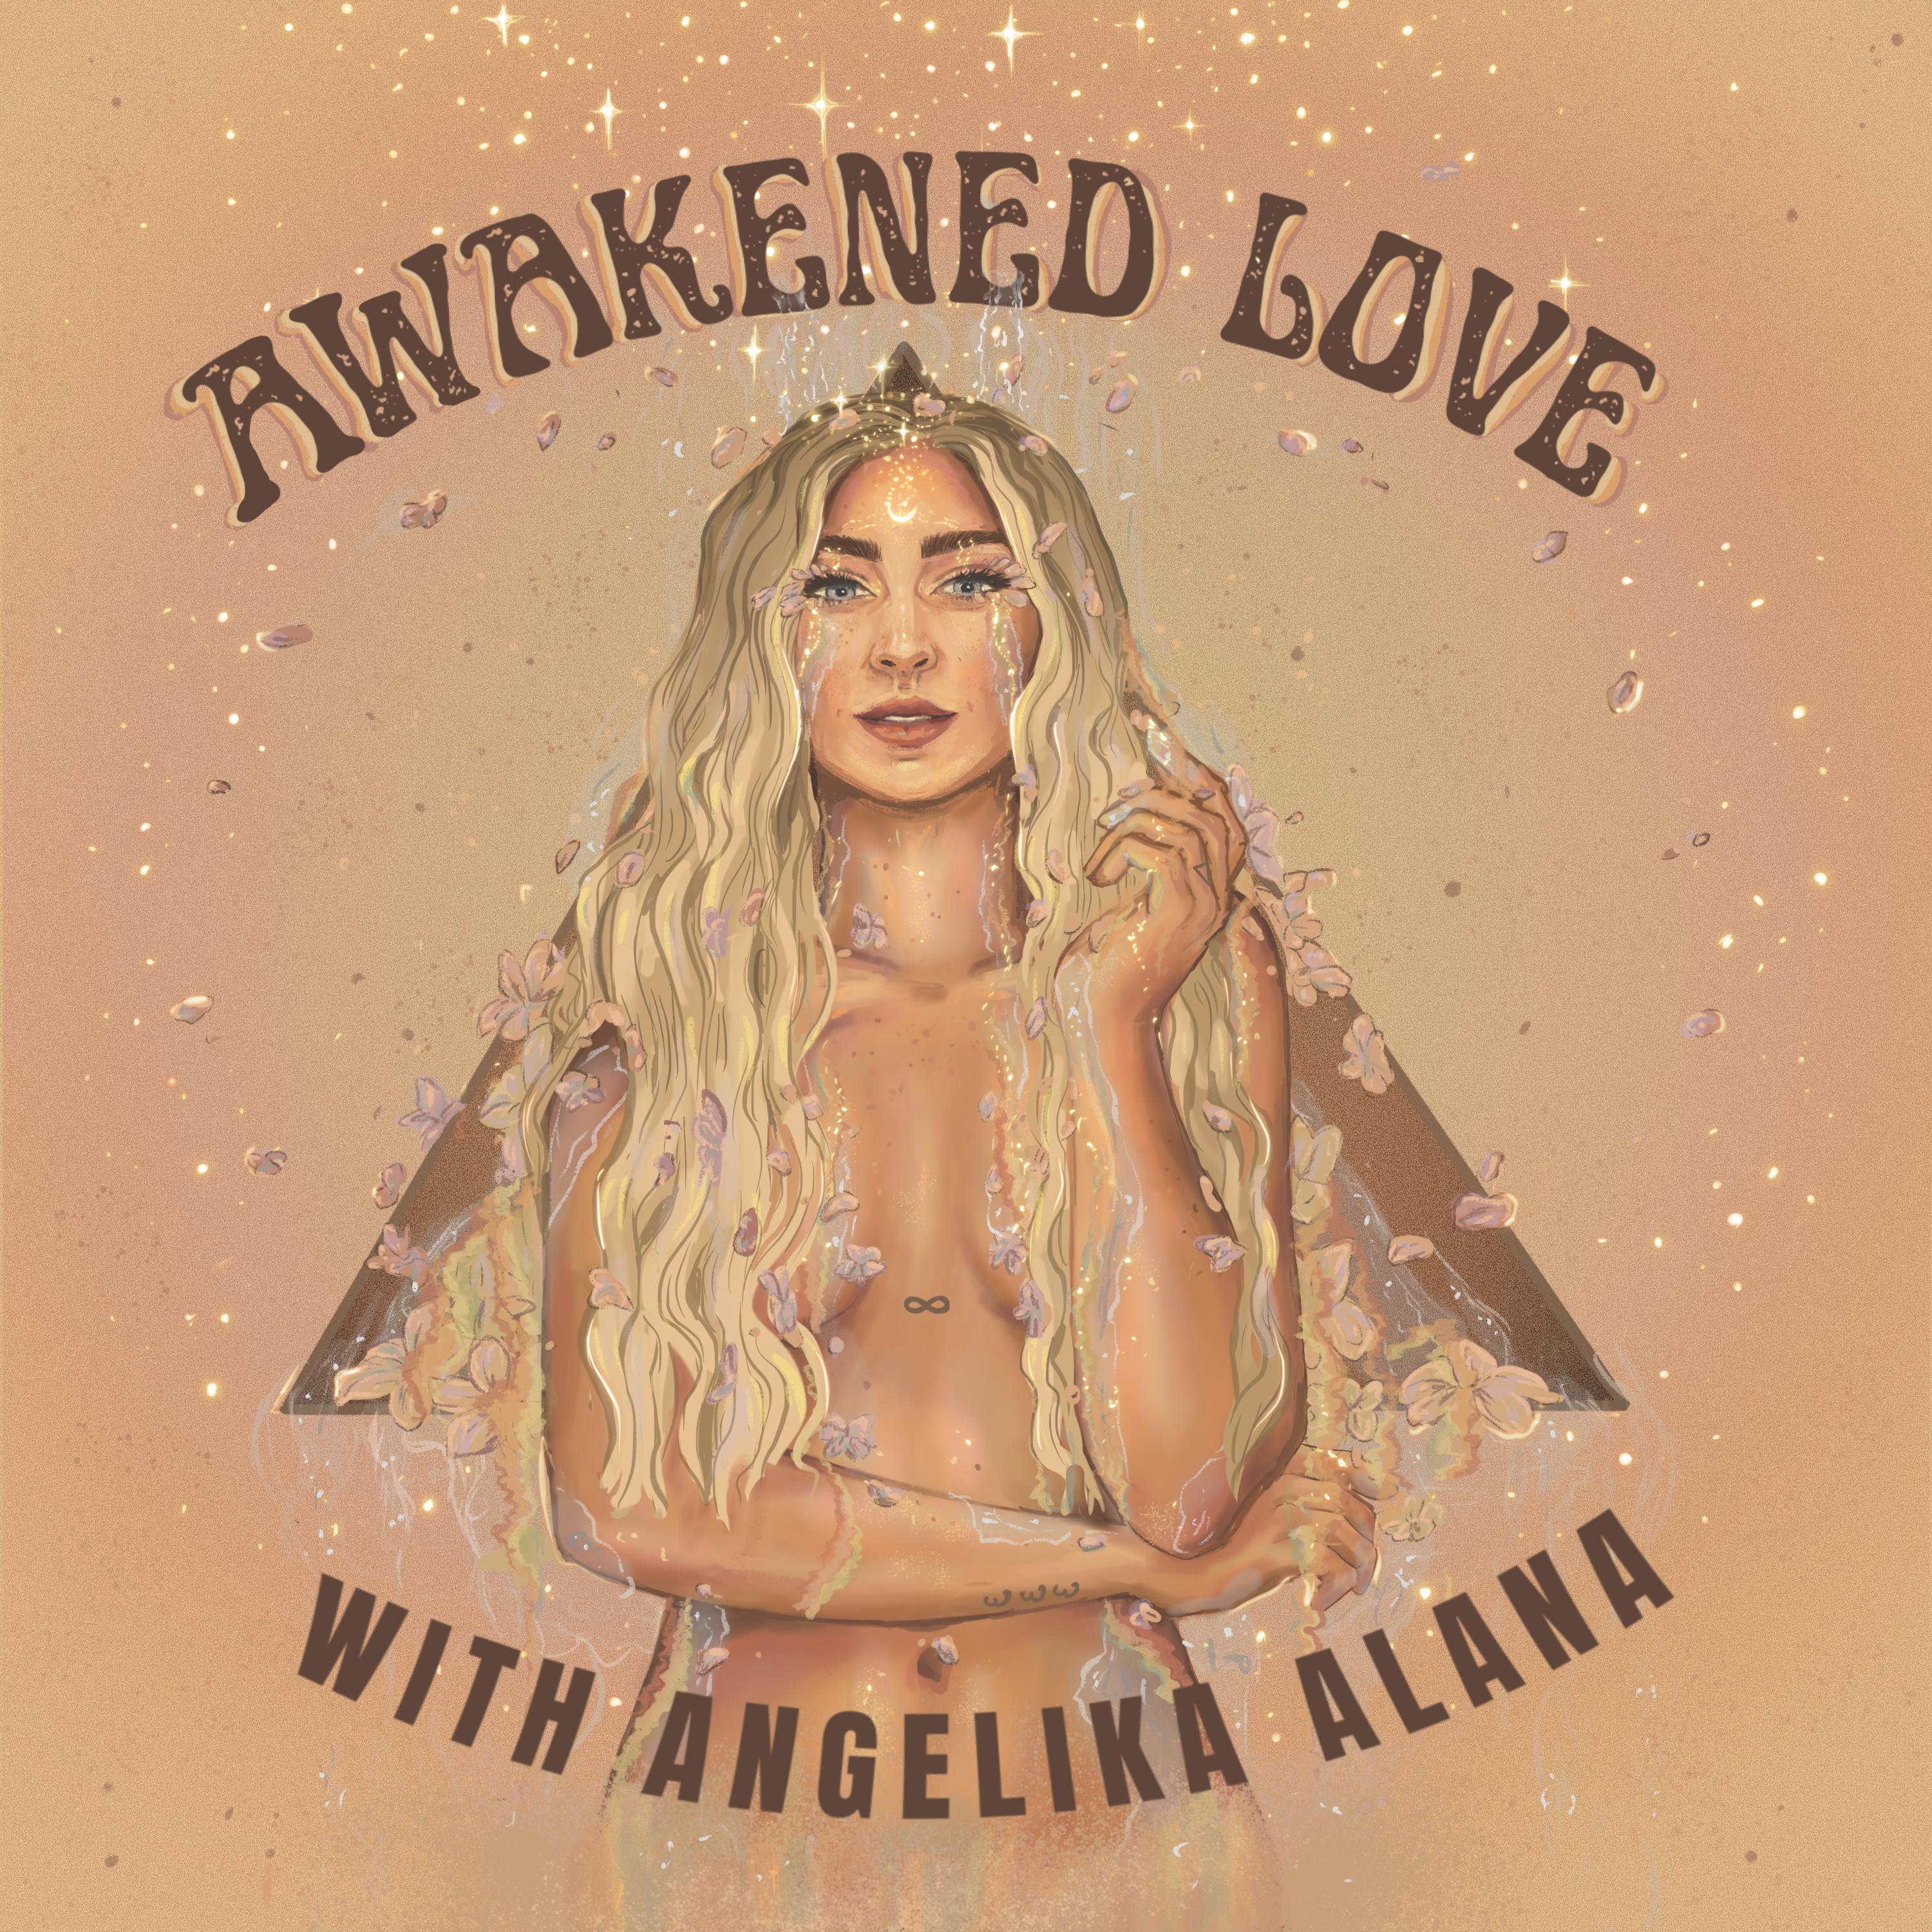 Exploring Polyamory: How to find Security in Non-Monogamy - with Jessica Fern | Awakened Love S2 EP 25